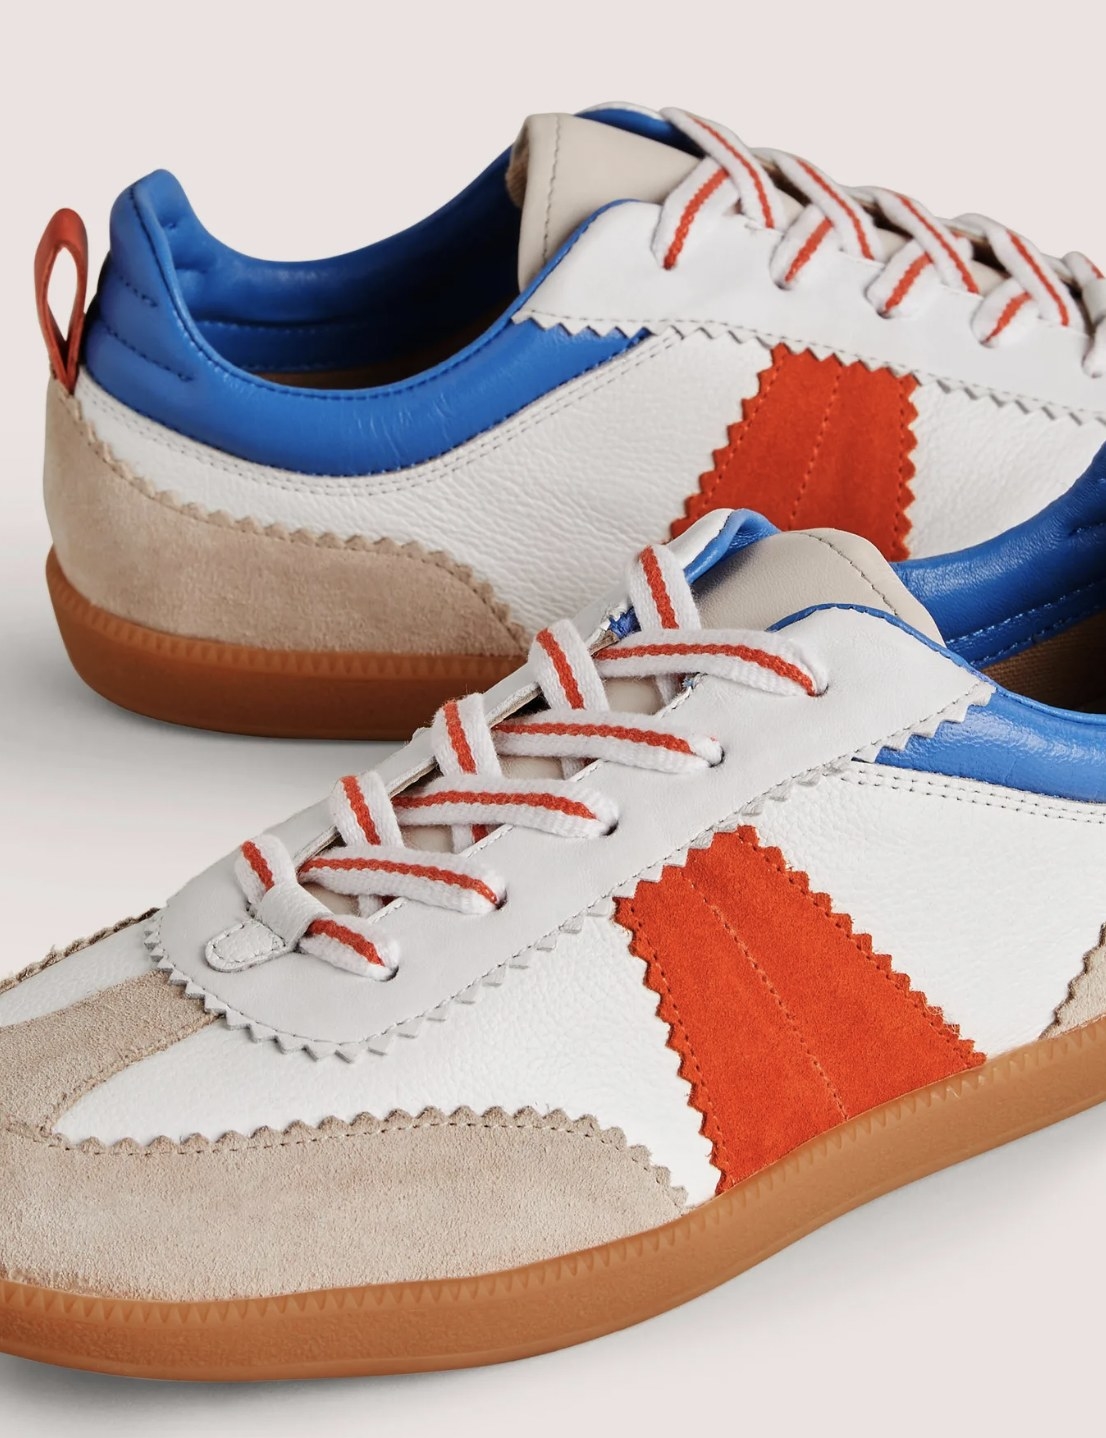 The red, blue, white, and beige block trainers